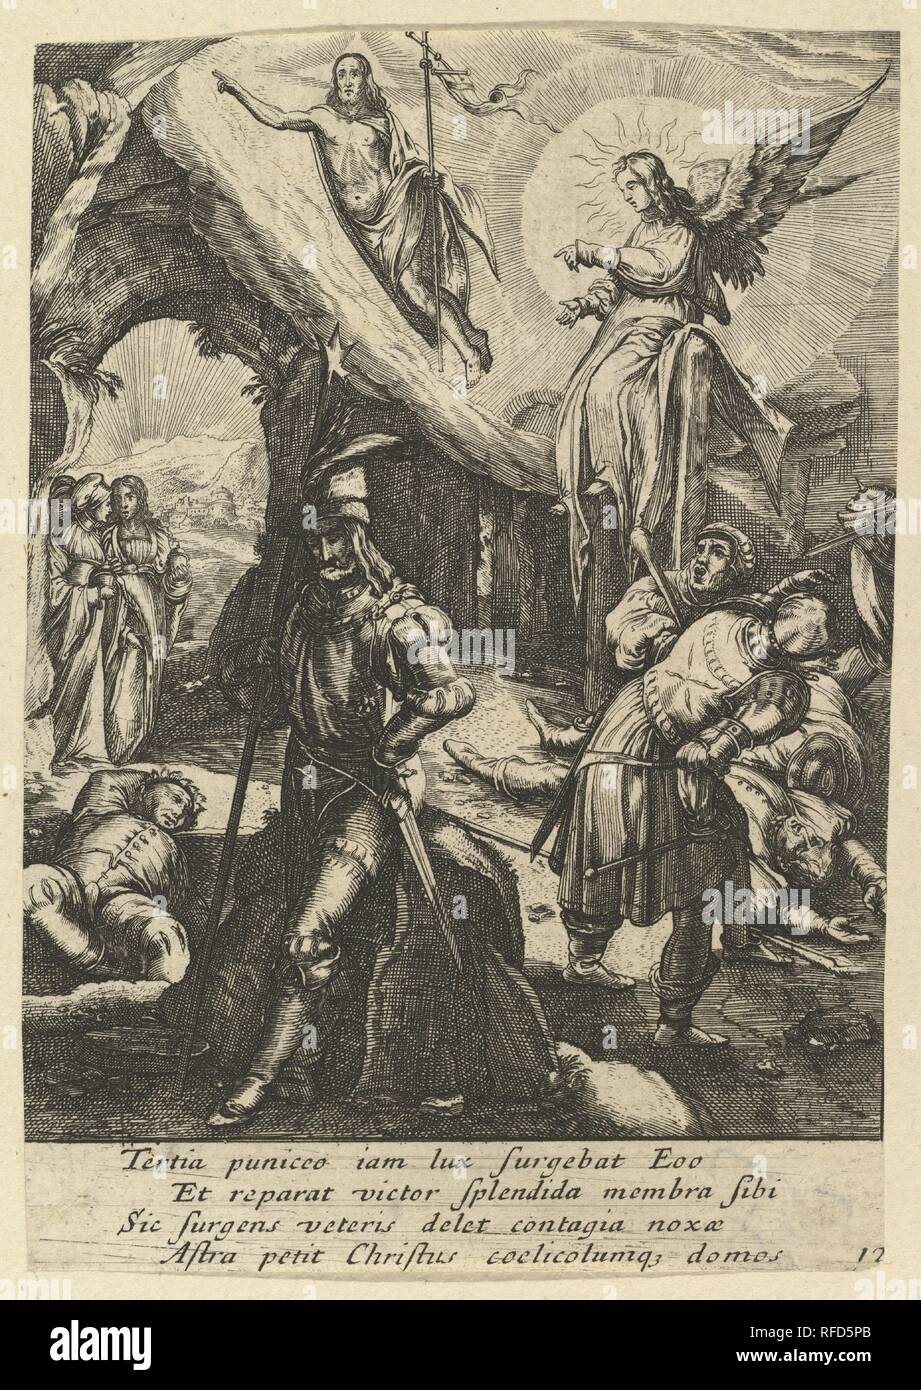 The Resurrection, from The Passion of Christ. Artist: After Hendrick Goltzius (Netherlandish, Mühlbracht 1558-1617 Haarlem); Nicolas Cochin (French, Troyes 1610-1686 Paris). Dimensions: Sheet: 5 5/8 x 3 15/16 in. (14.3 x 10 cm). Publisher: Jean I Leblond (French, ca. 1590-1666 Paris). Date: mid 17th century. Museum: Metropolitan Museum of Art, New York, USA. Stock Photo